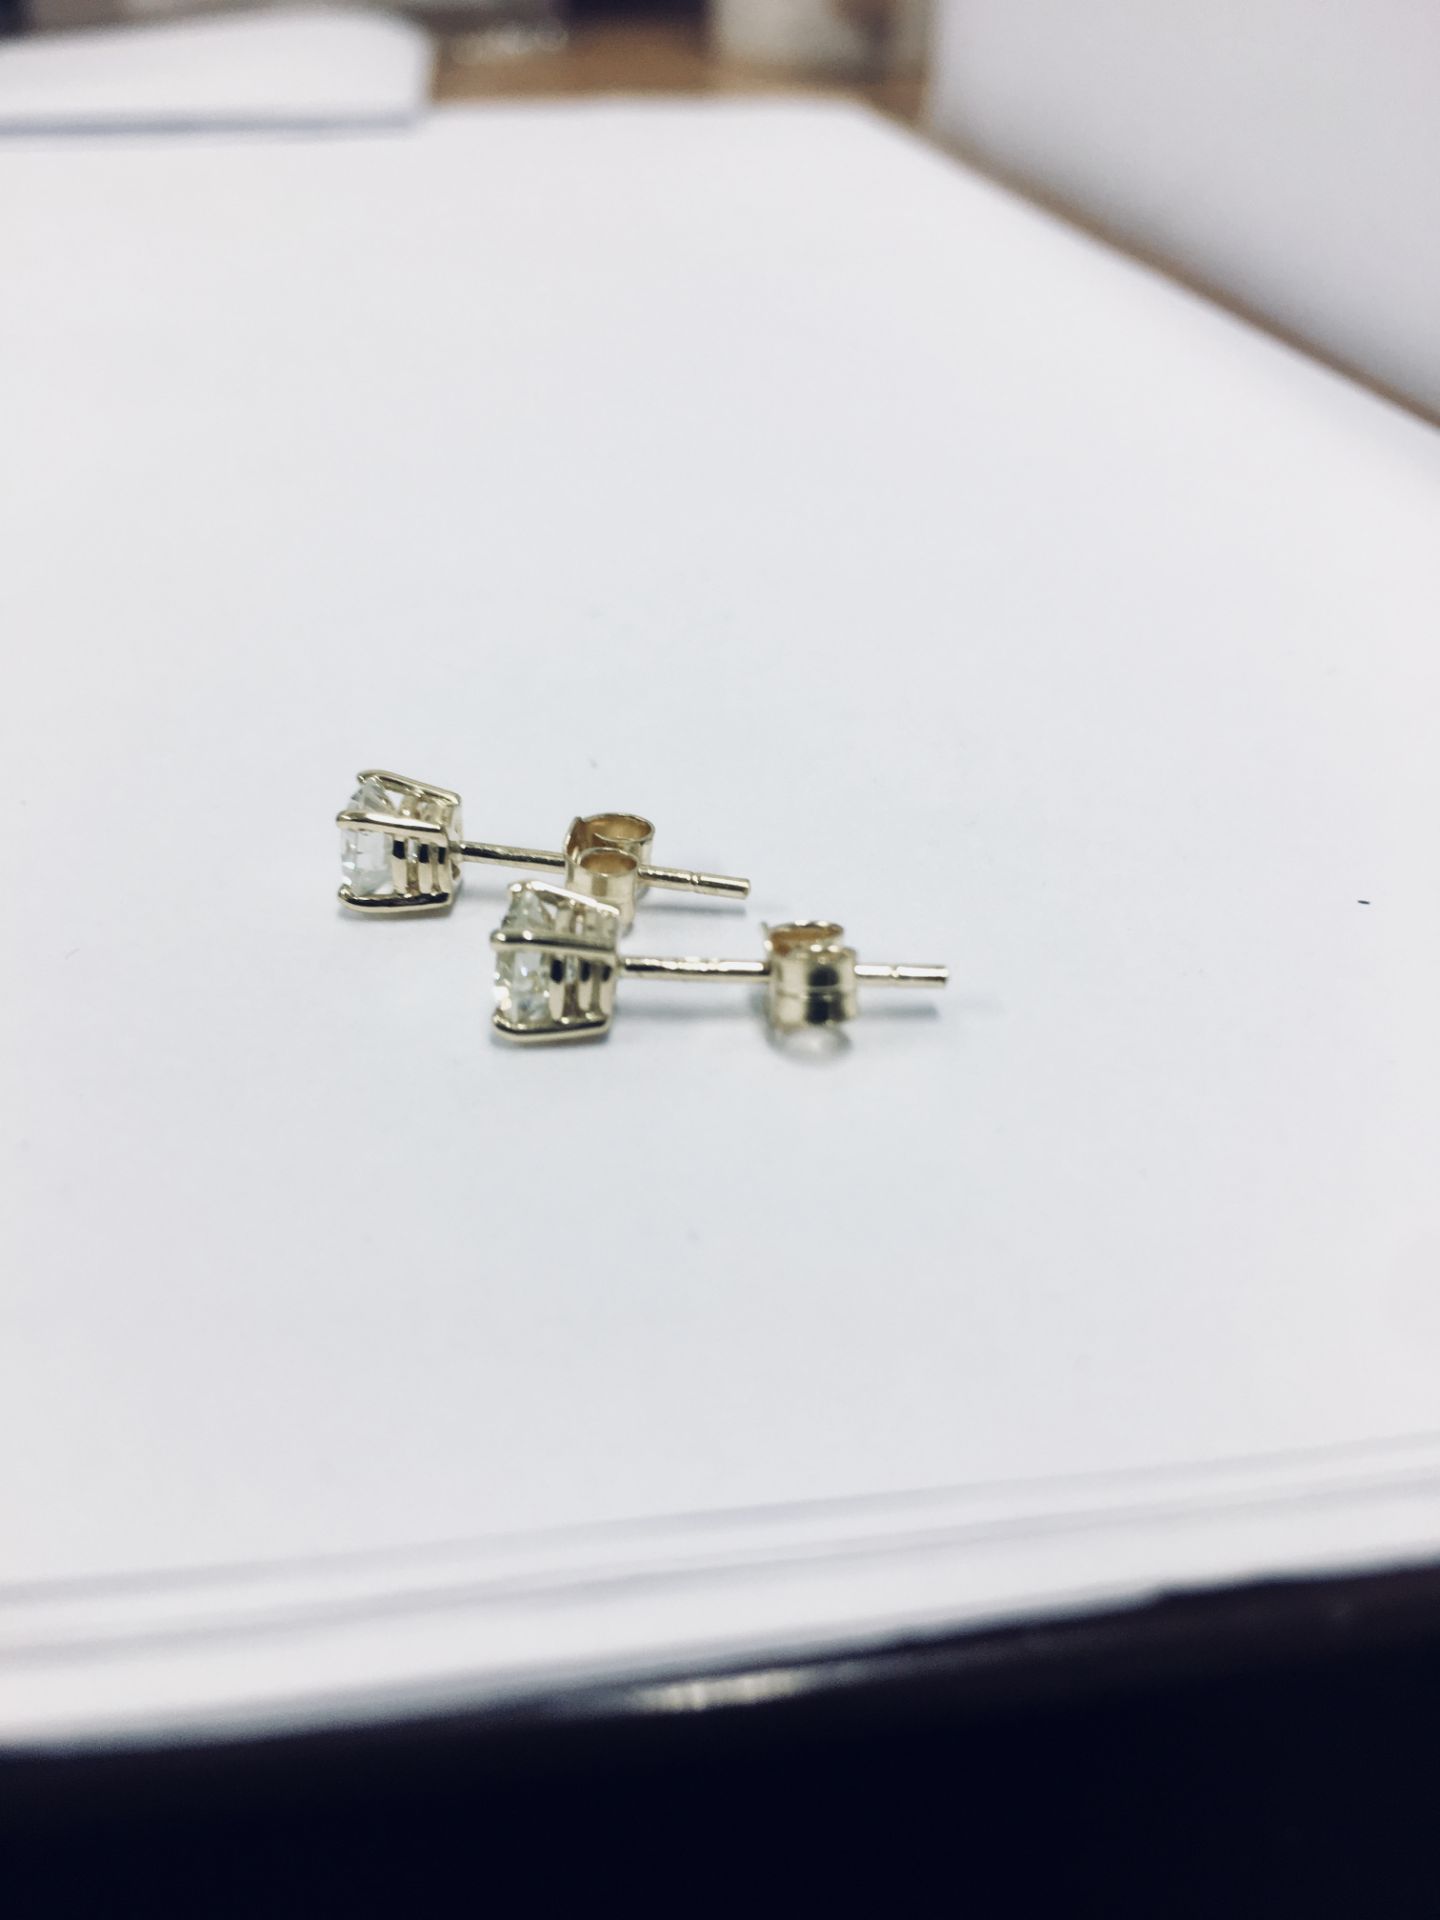 1.00Ct Diamond Solitaire Earrings Set In 18Ct Yellow Gold. - Image 5 of 19